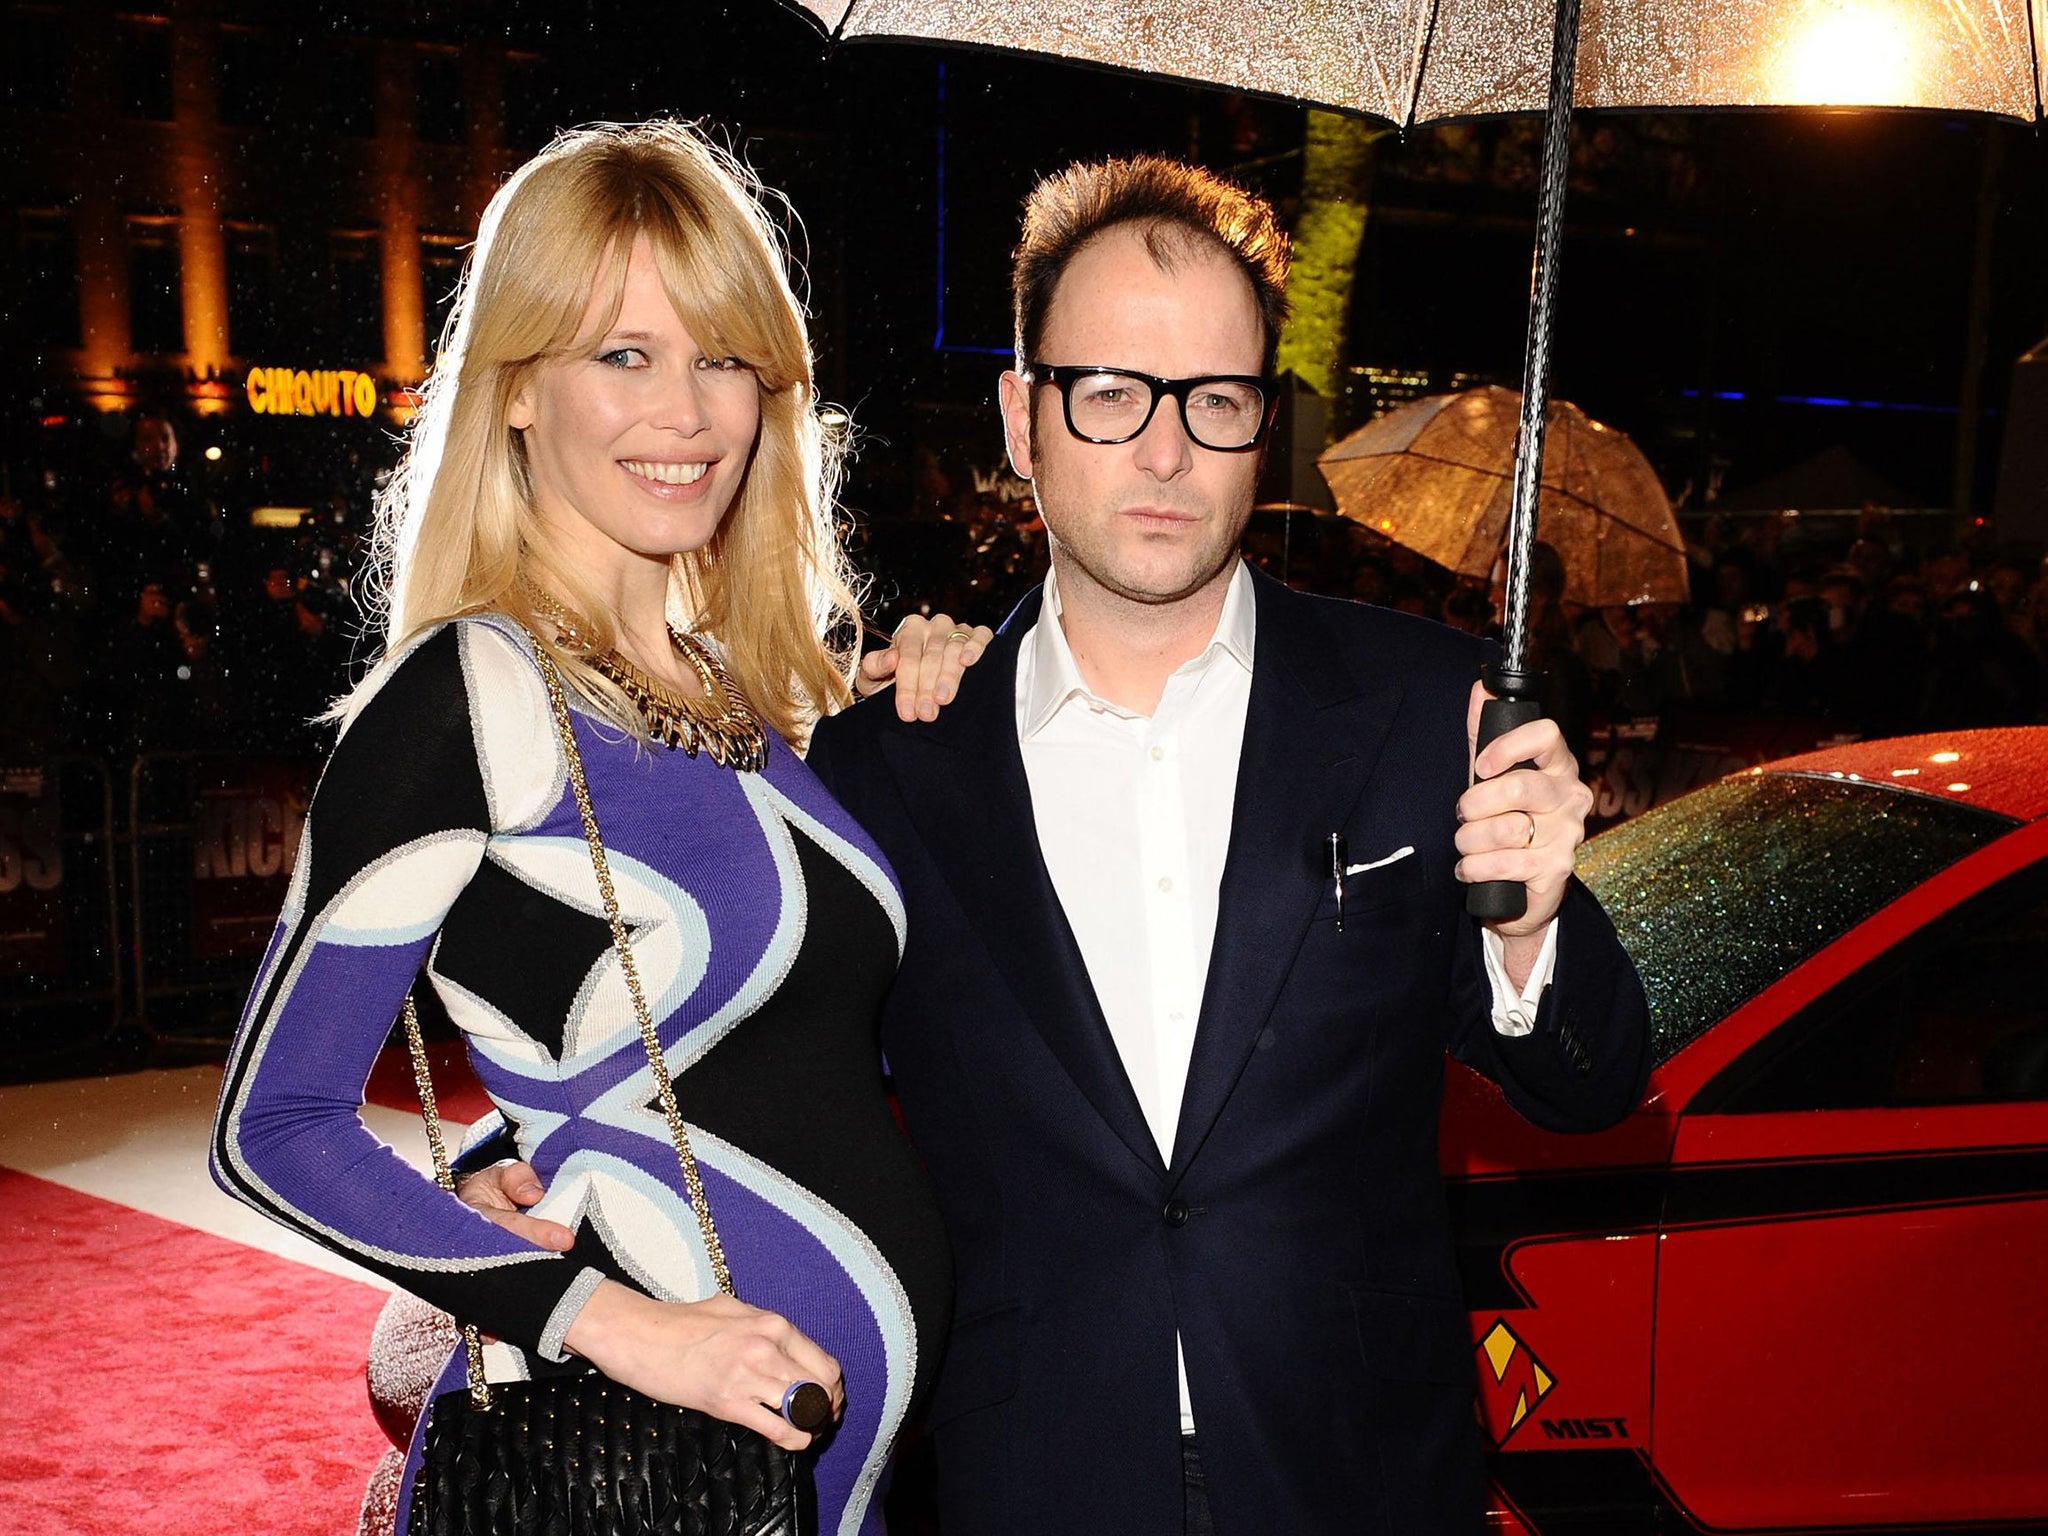 Claudia Schiffer and husband Matthew Vaughn at Chequers in 2010